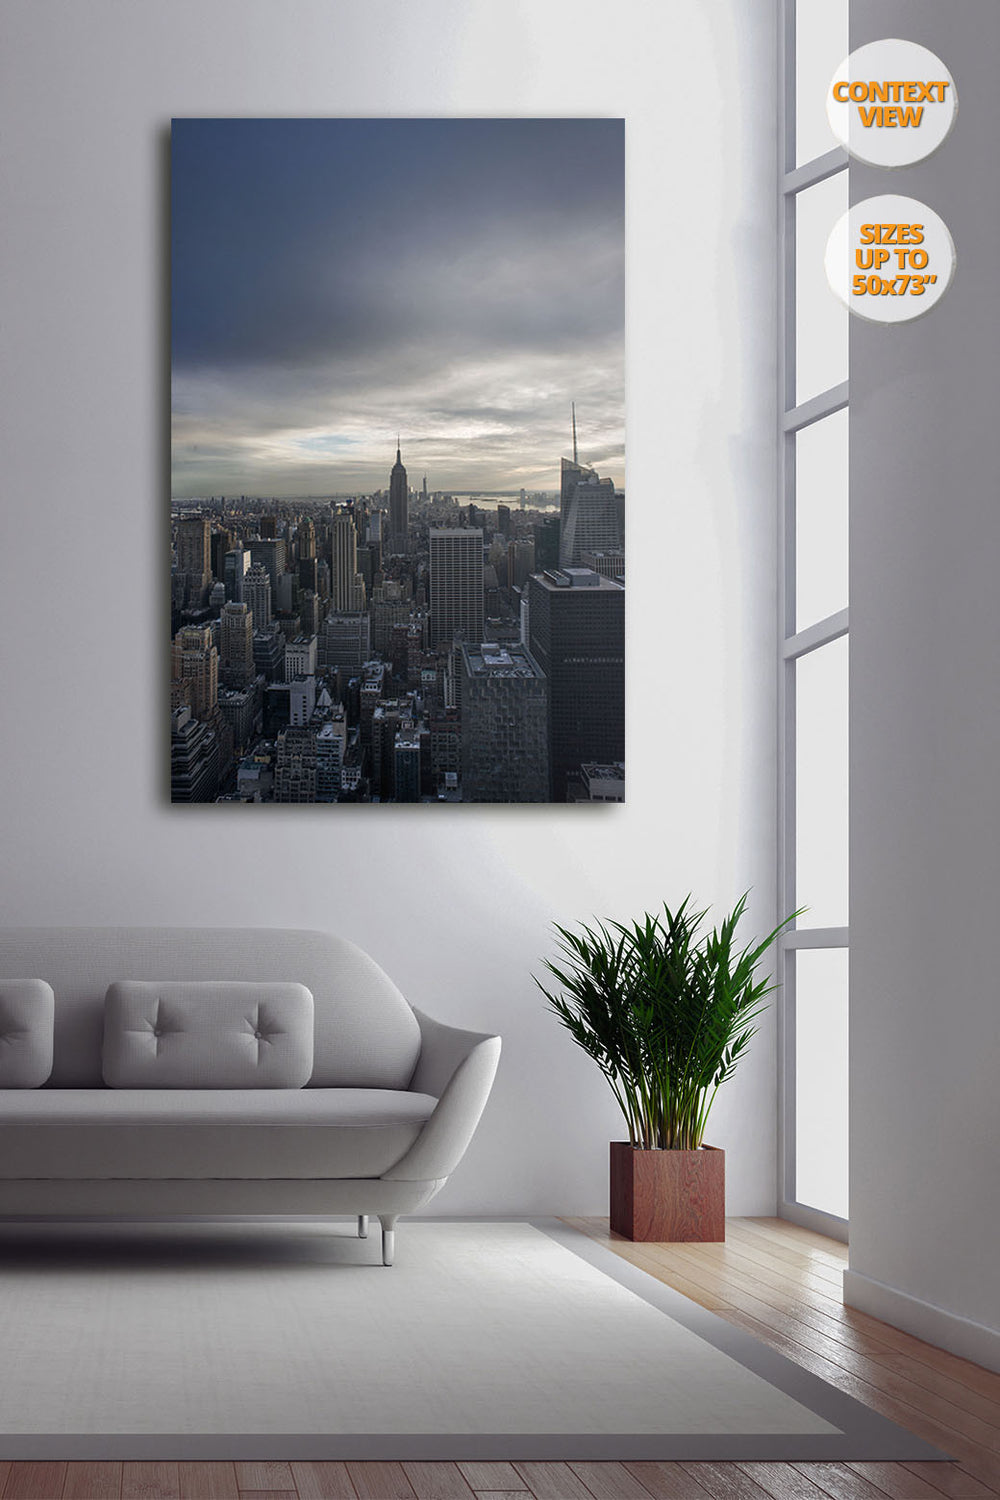 The Empire State Building before sunset, Midtown Manhattan, NYC. | Print hanged next to window.